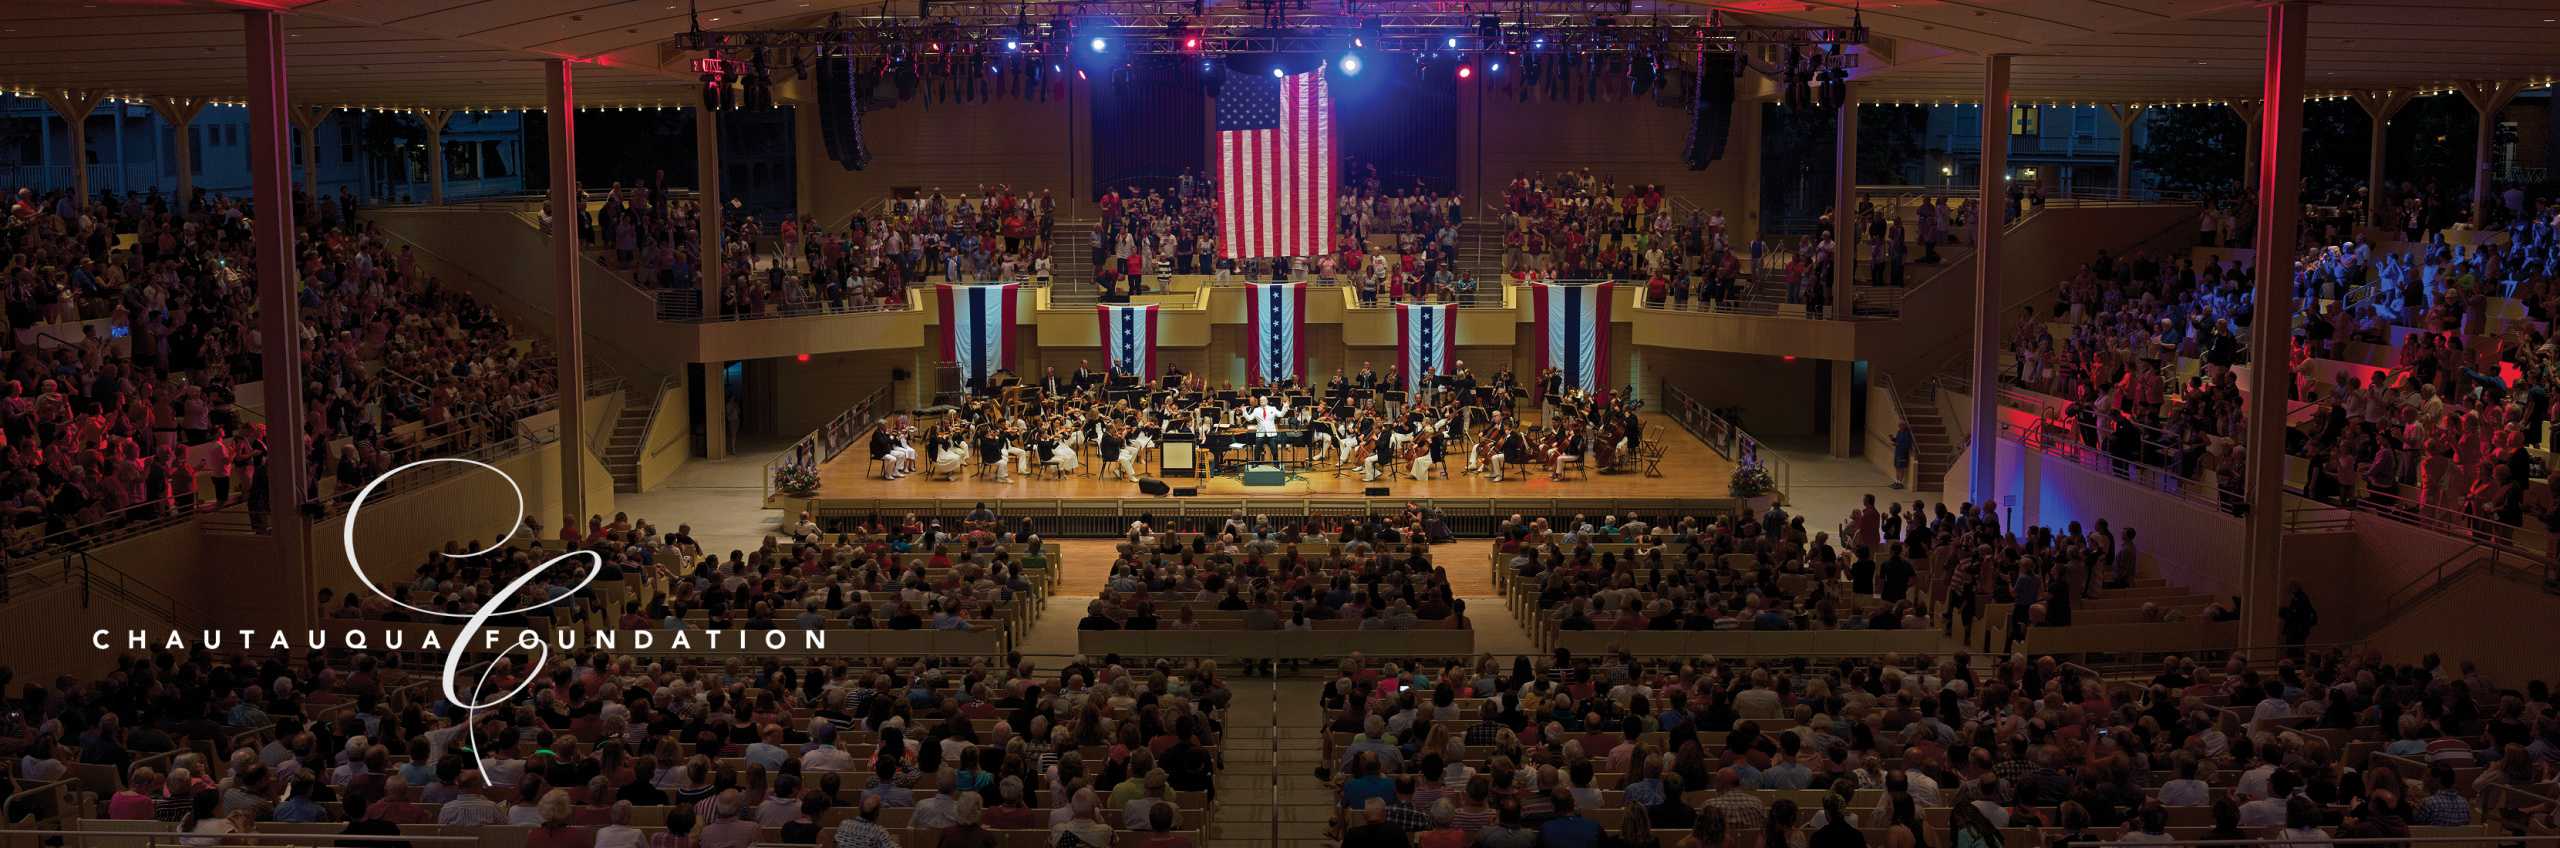 CSO Independence Day Pops Concert in the Amphitheater with Chautauqua Foundation logo